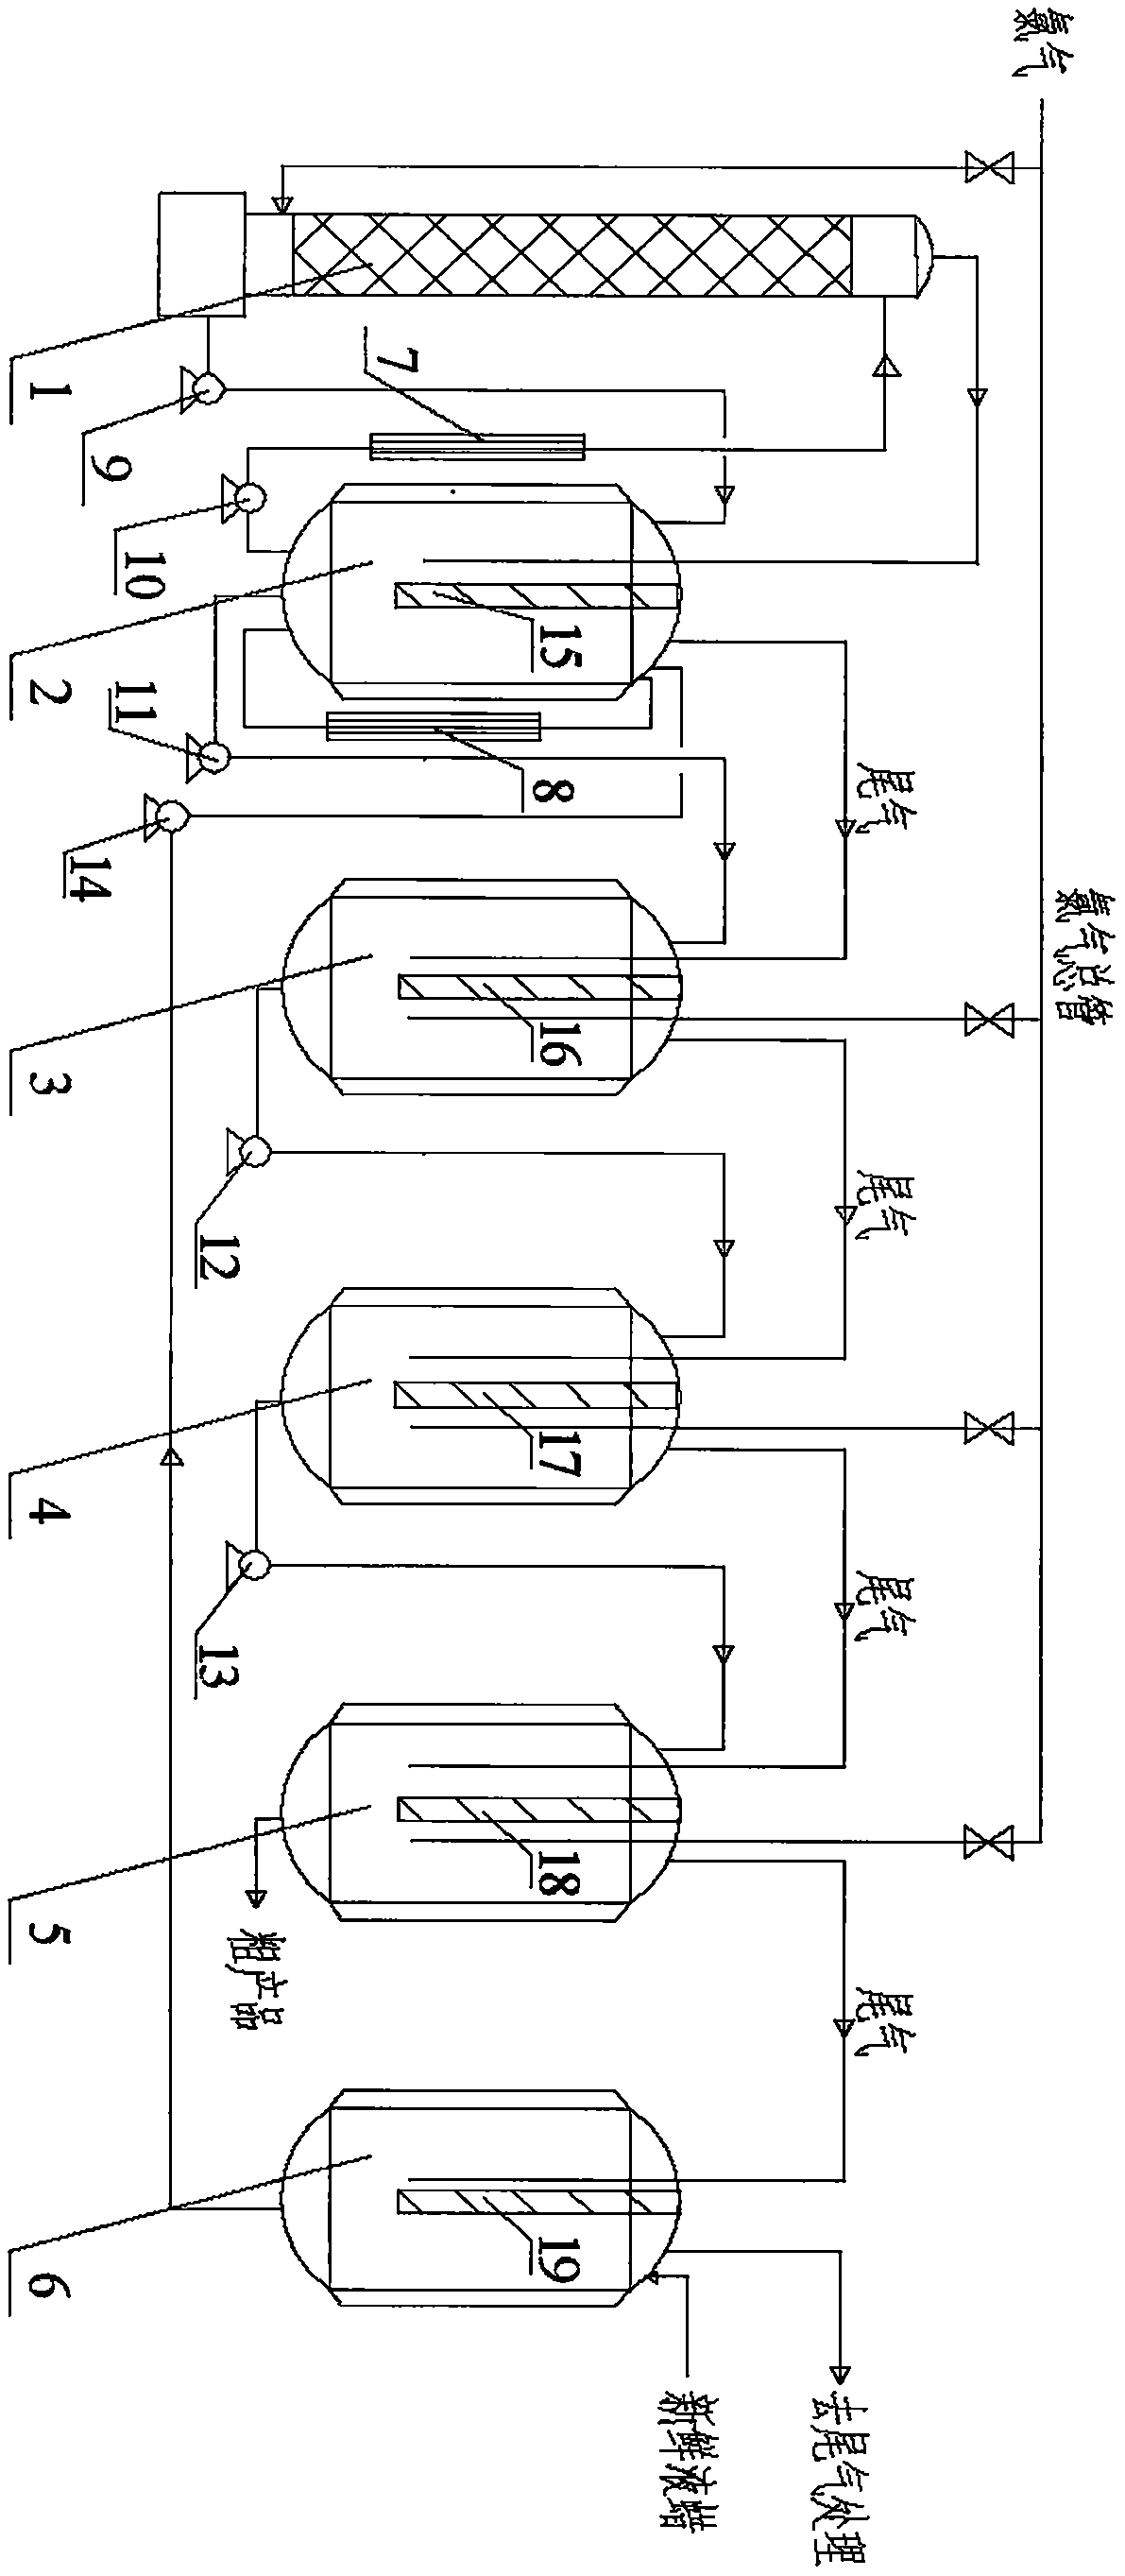 Continuous chloride production device